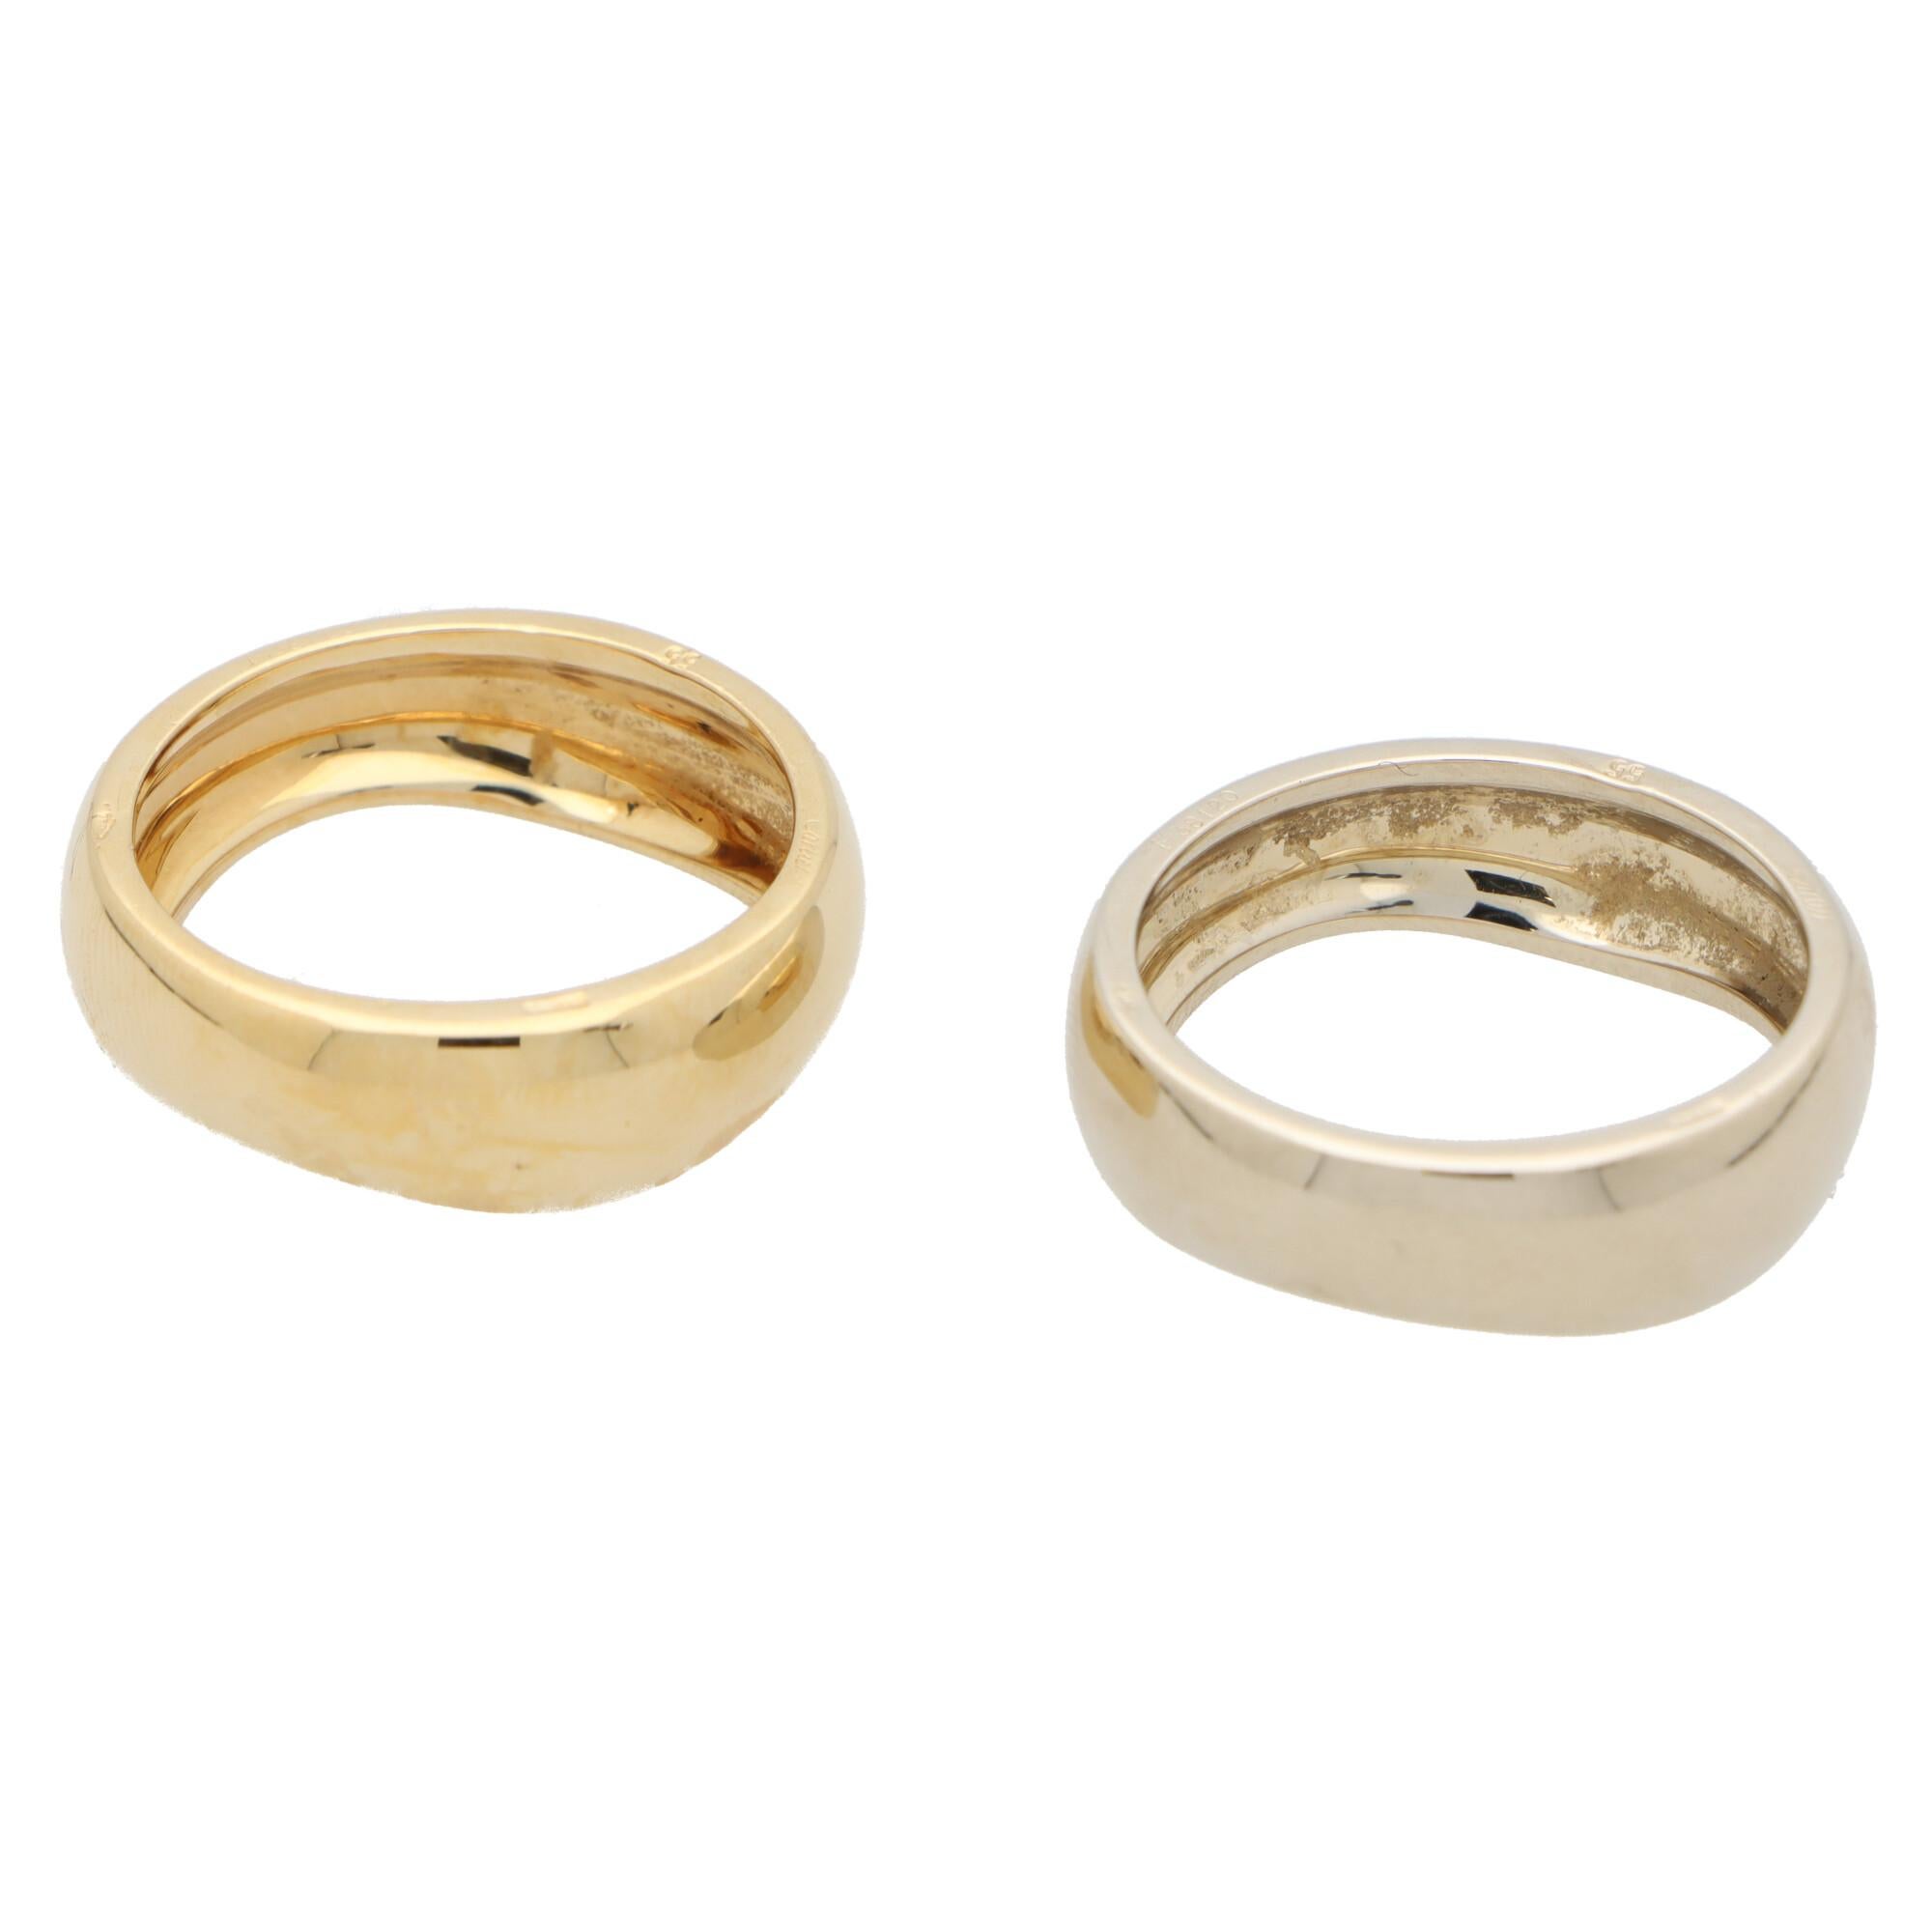 Retro Vintage Cartier Love Me Ring Set in 18k White and Yellow Gold